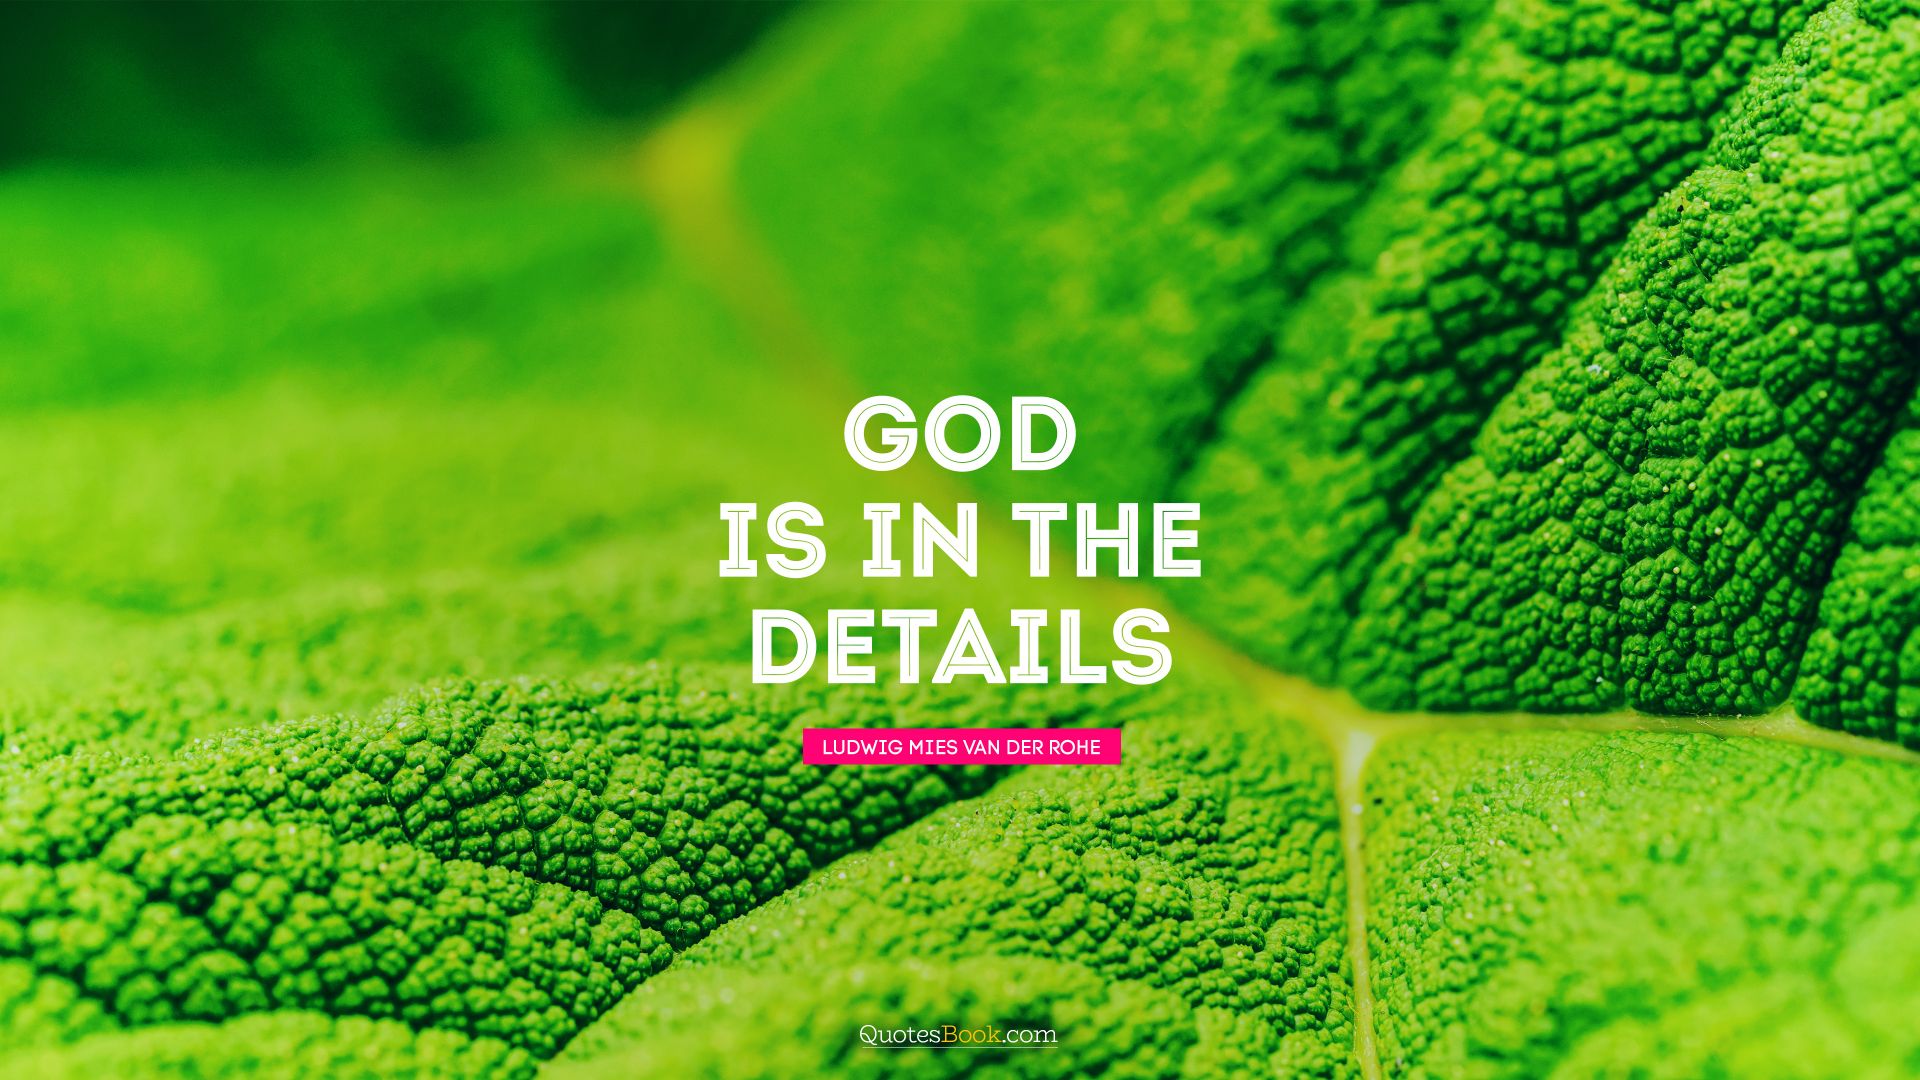 God is in the details. - Quote by Ludwig Mies van der Rohe